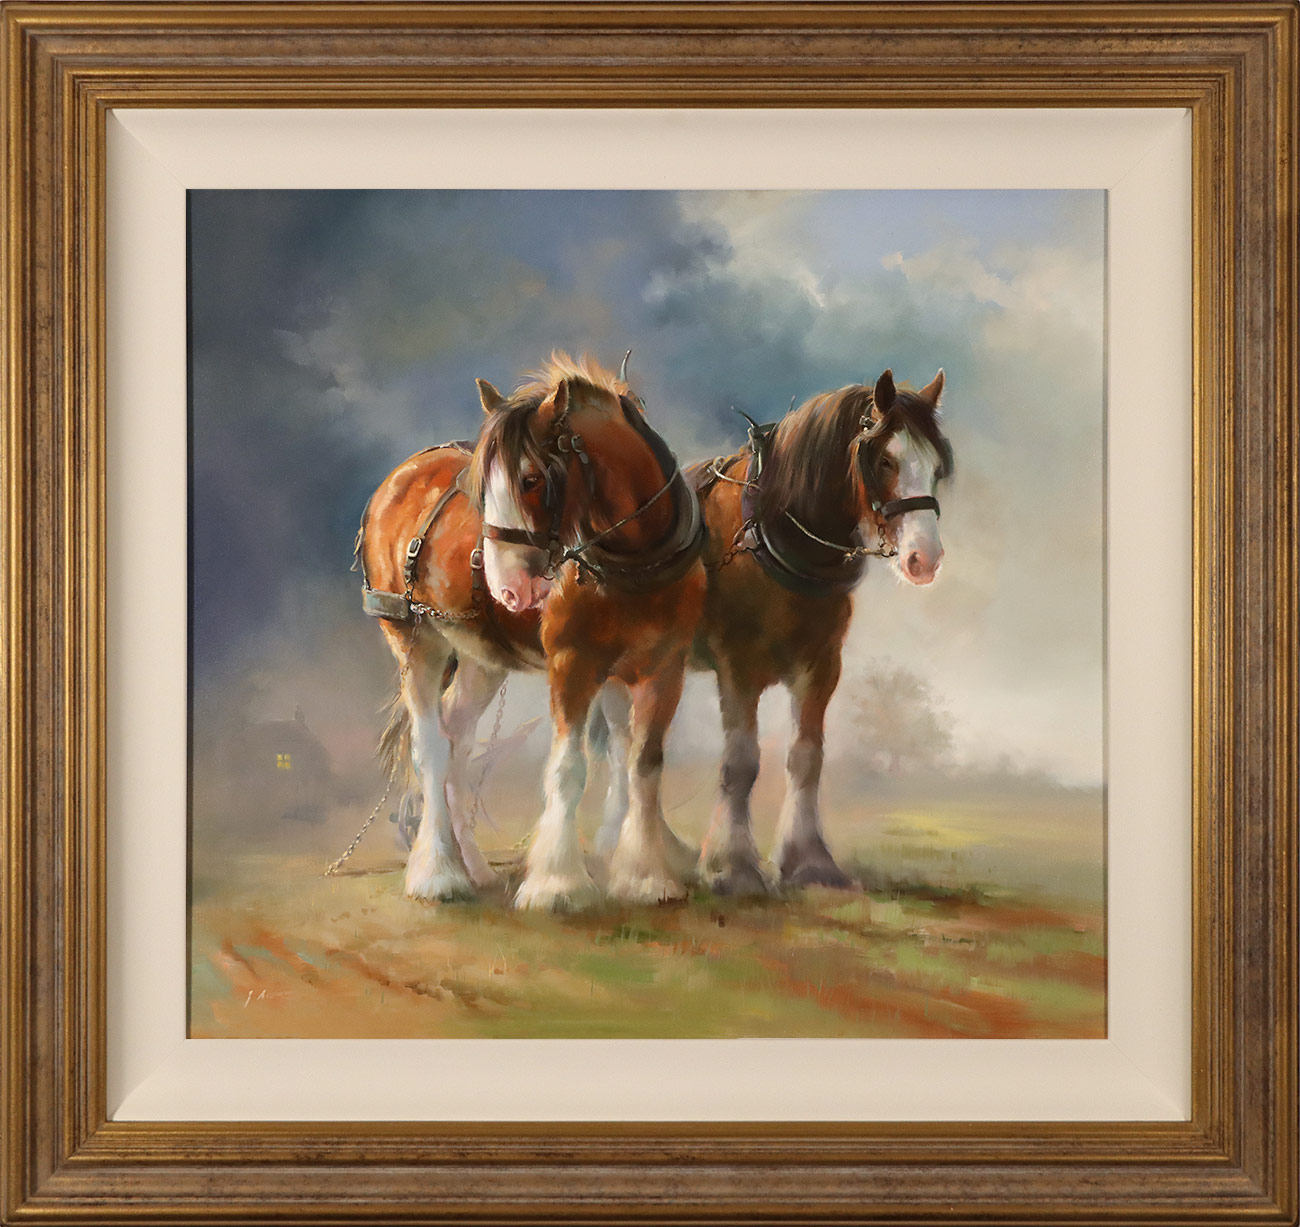 Jacqueline Stanhope, Original oil painting on canvas, Shire Horses. Click to enlarge